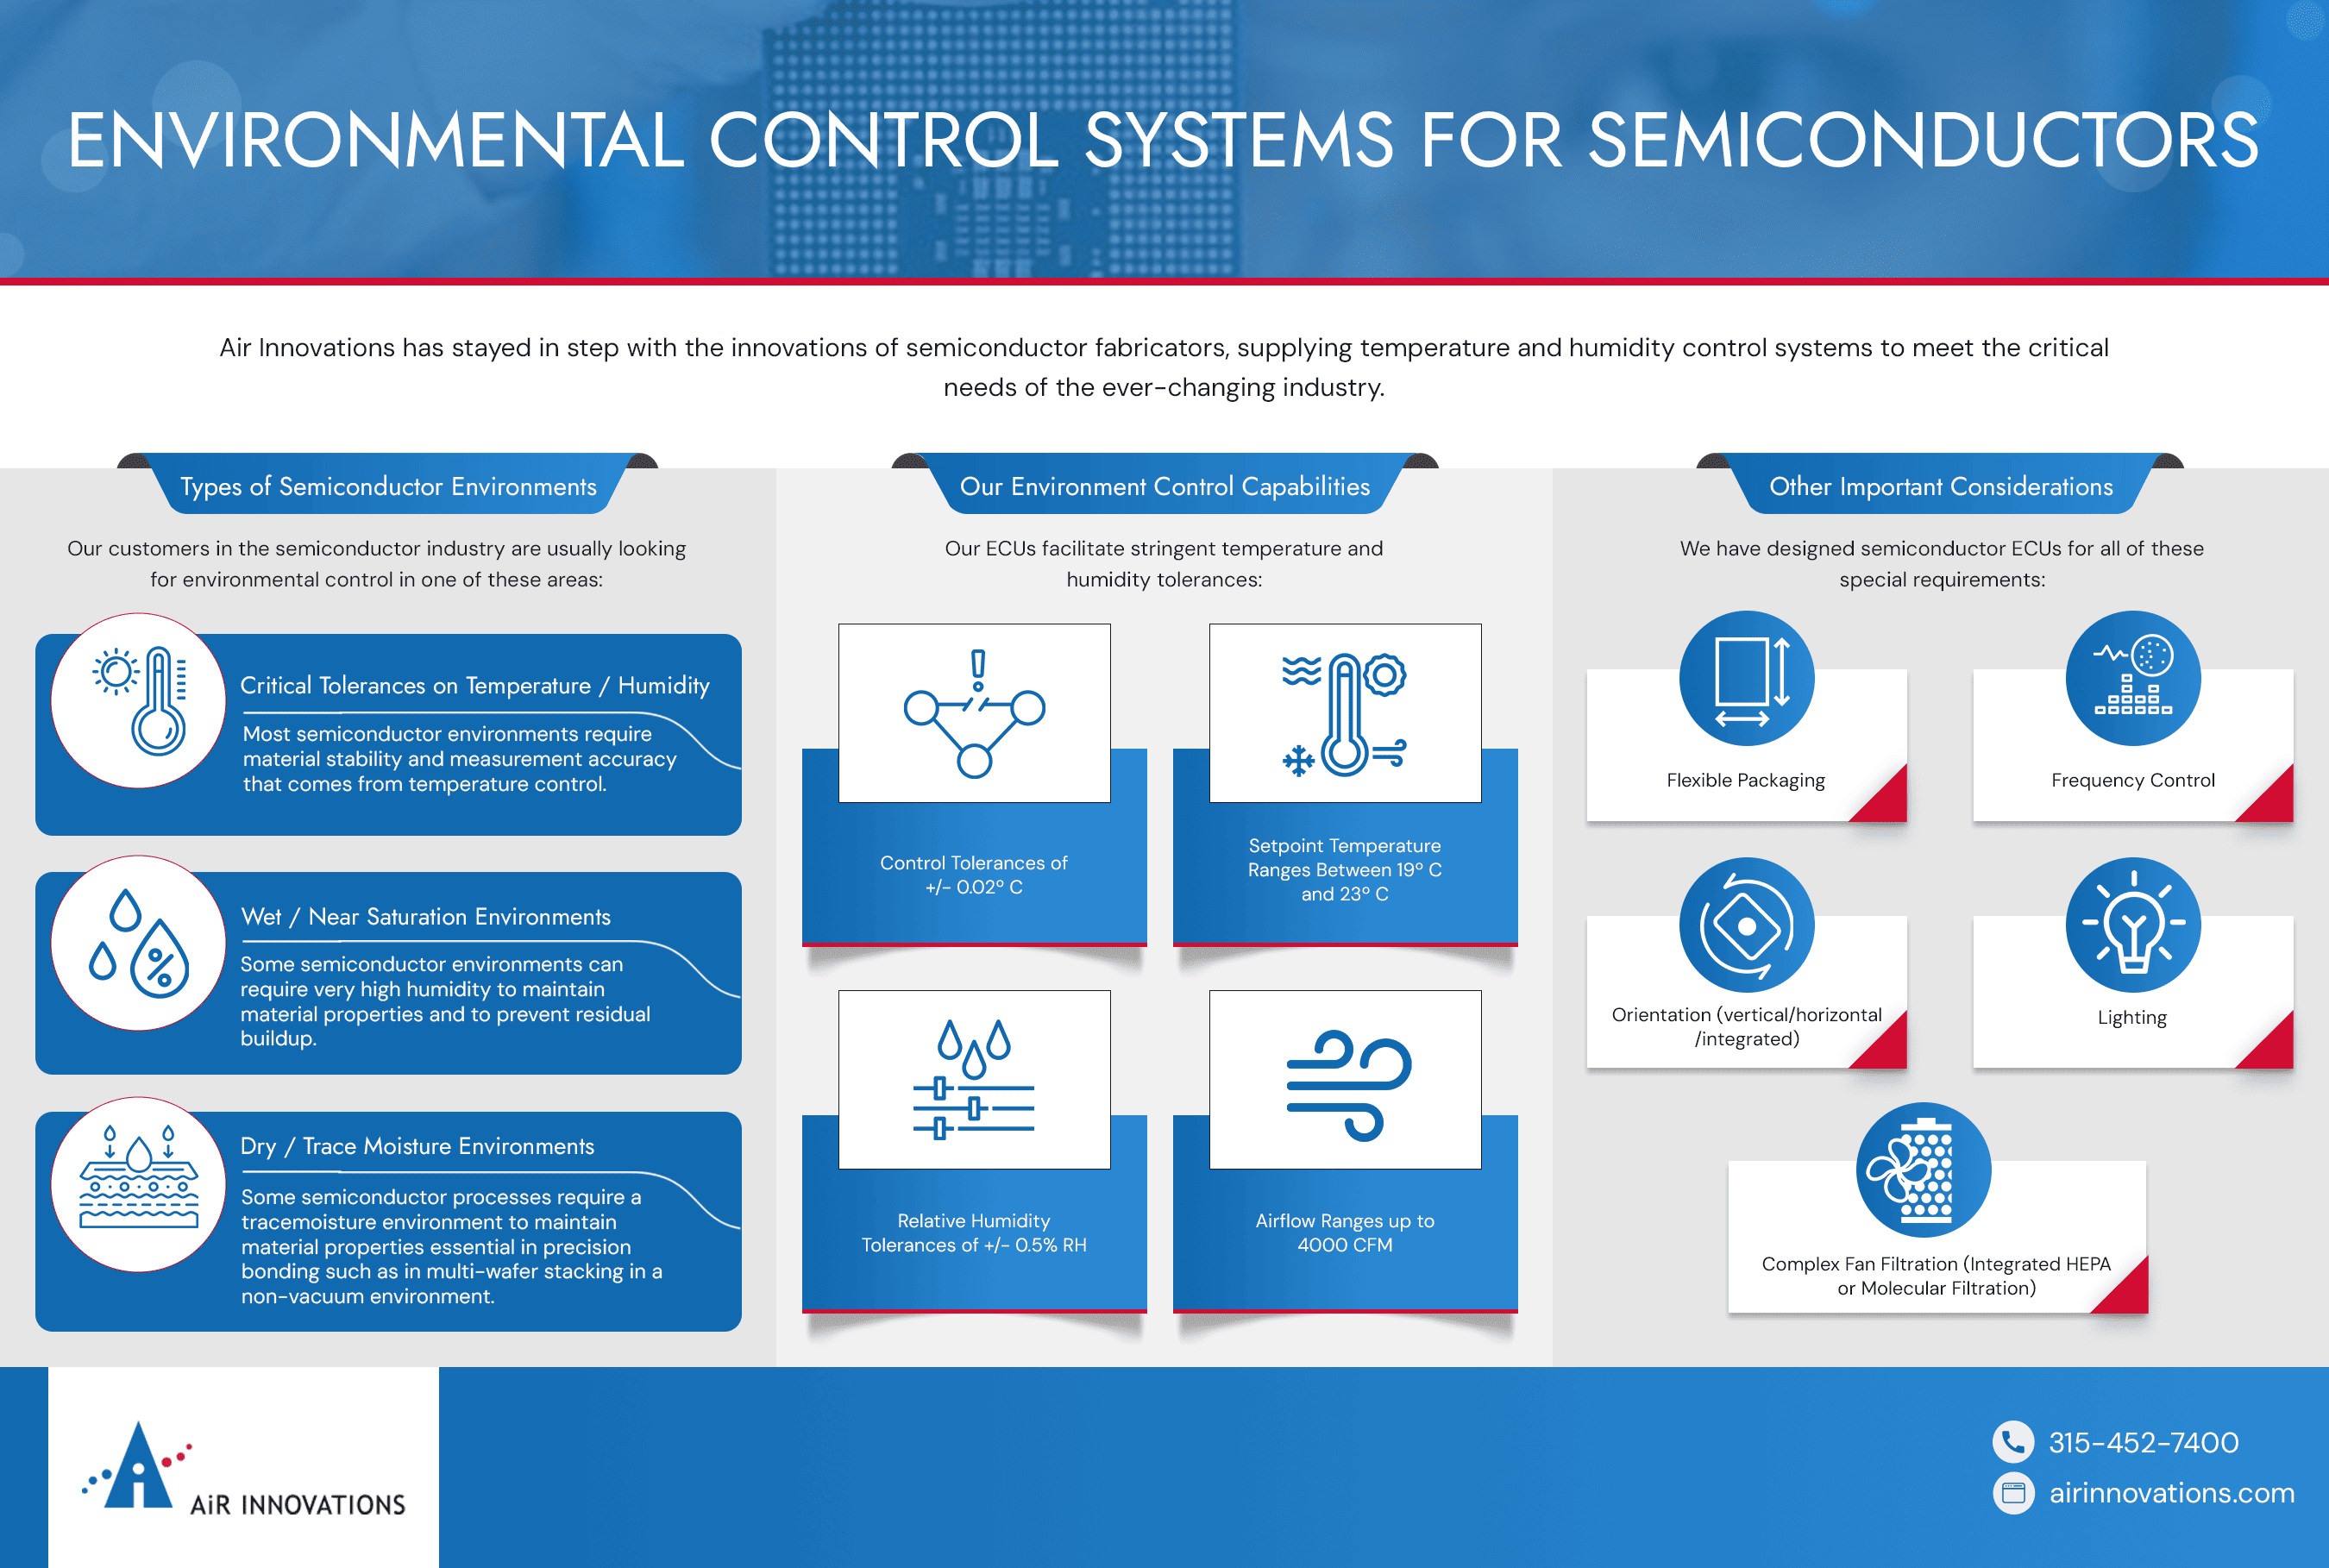 Humidity & Temperature Control Systems for Semiconductors